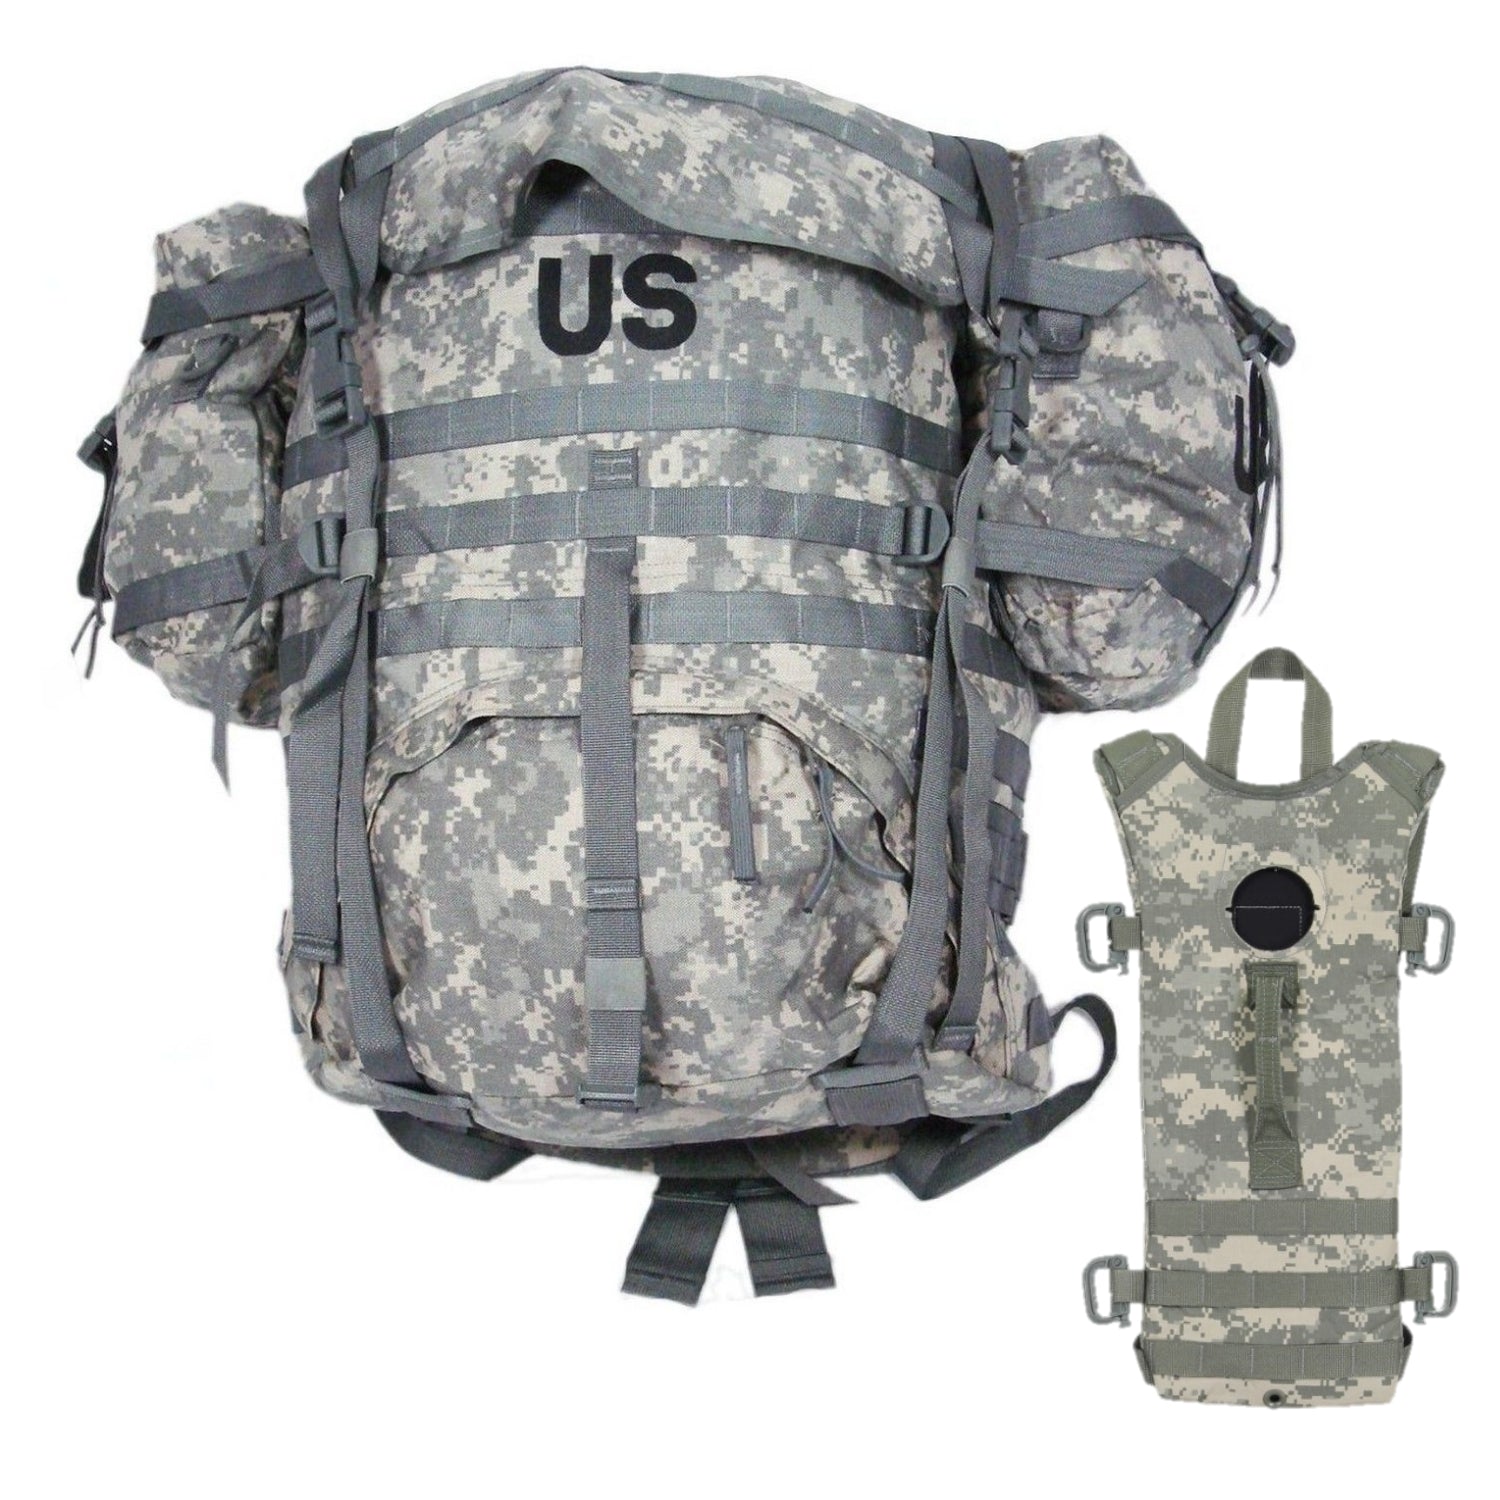 – Army US McGuire Pads Frame, Kidney RuckSack Military Large ACU Pouches and Molle GI 2 with II Navy